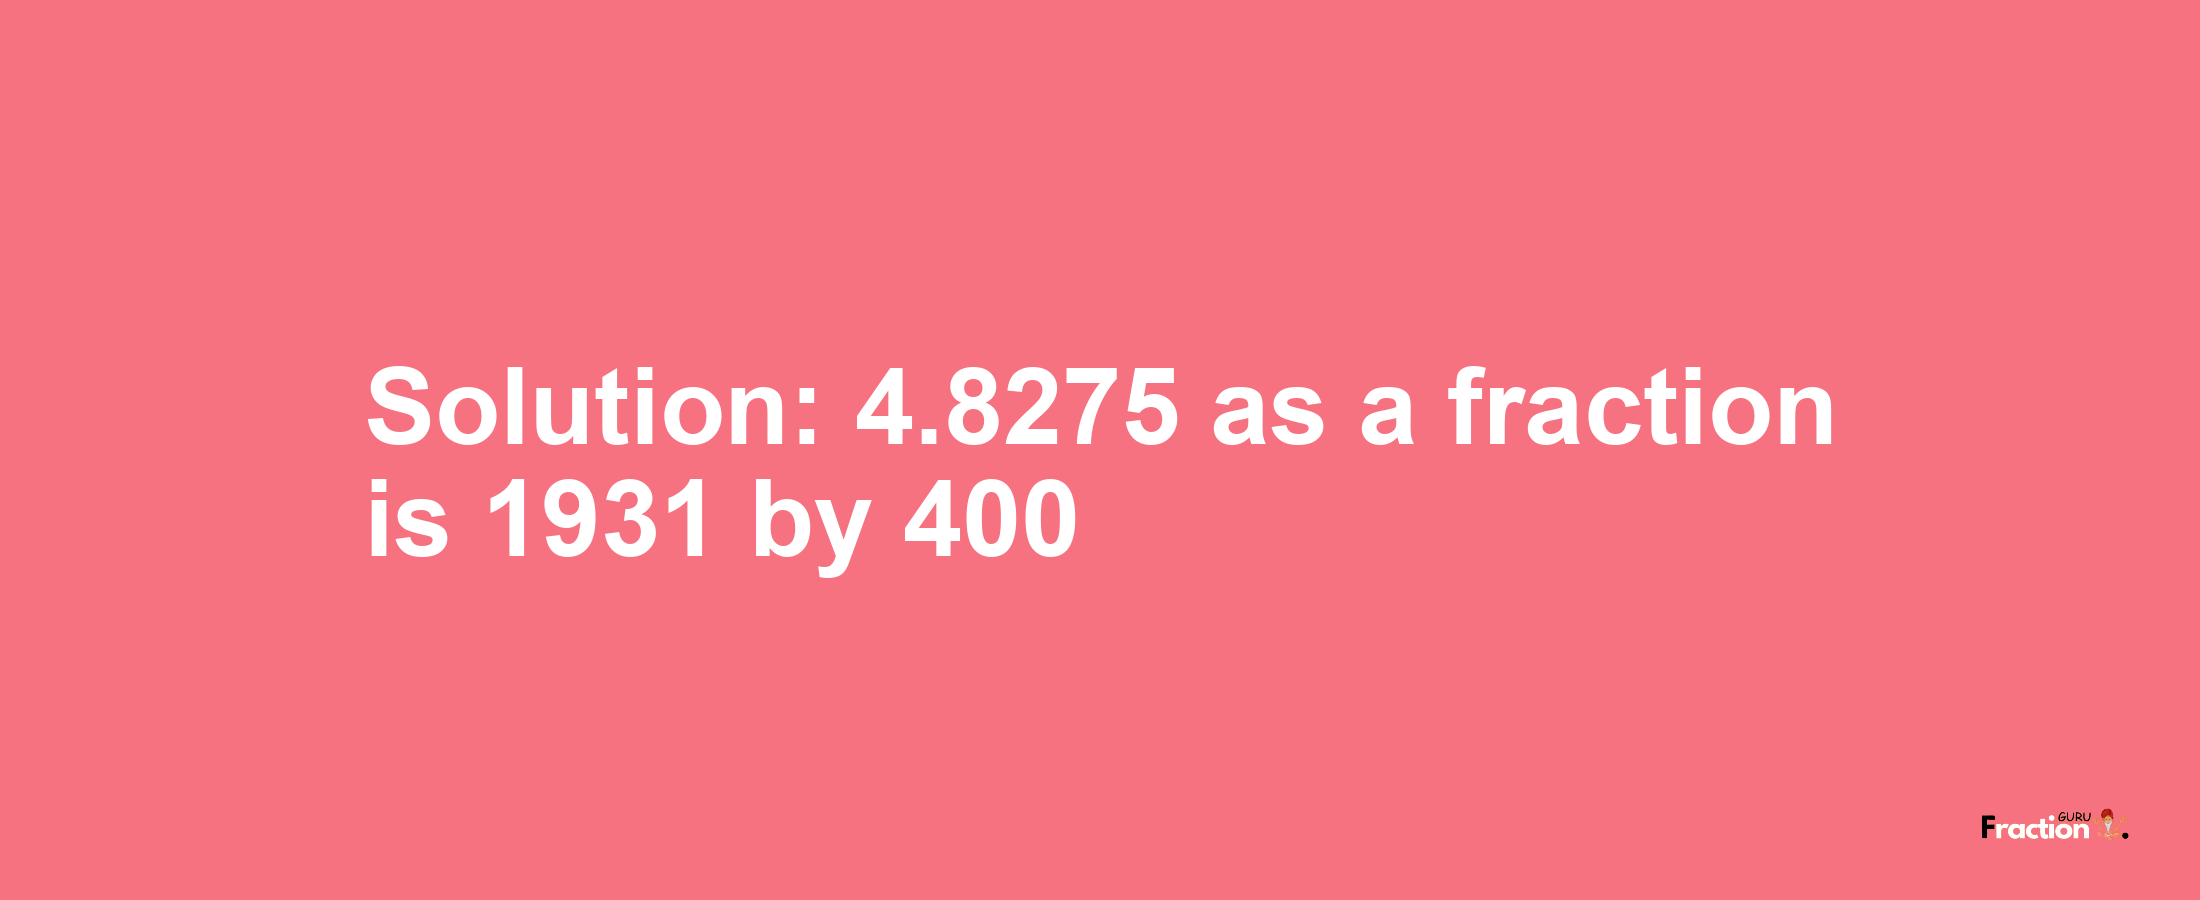 Solution:4.8275 as a fraction is 1931/400